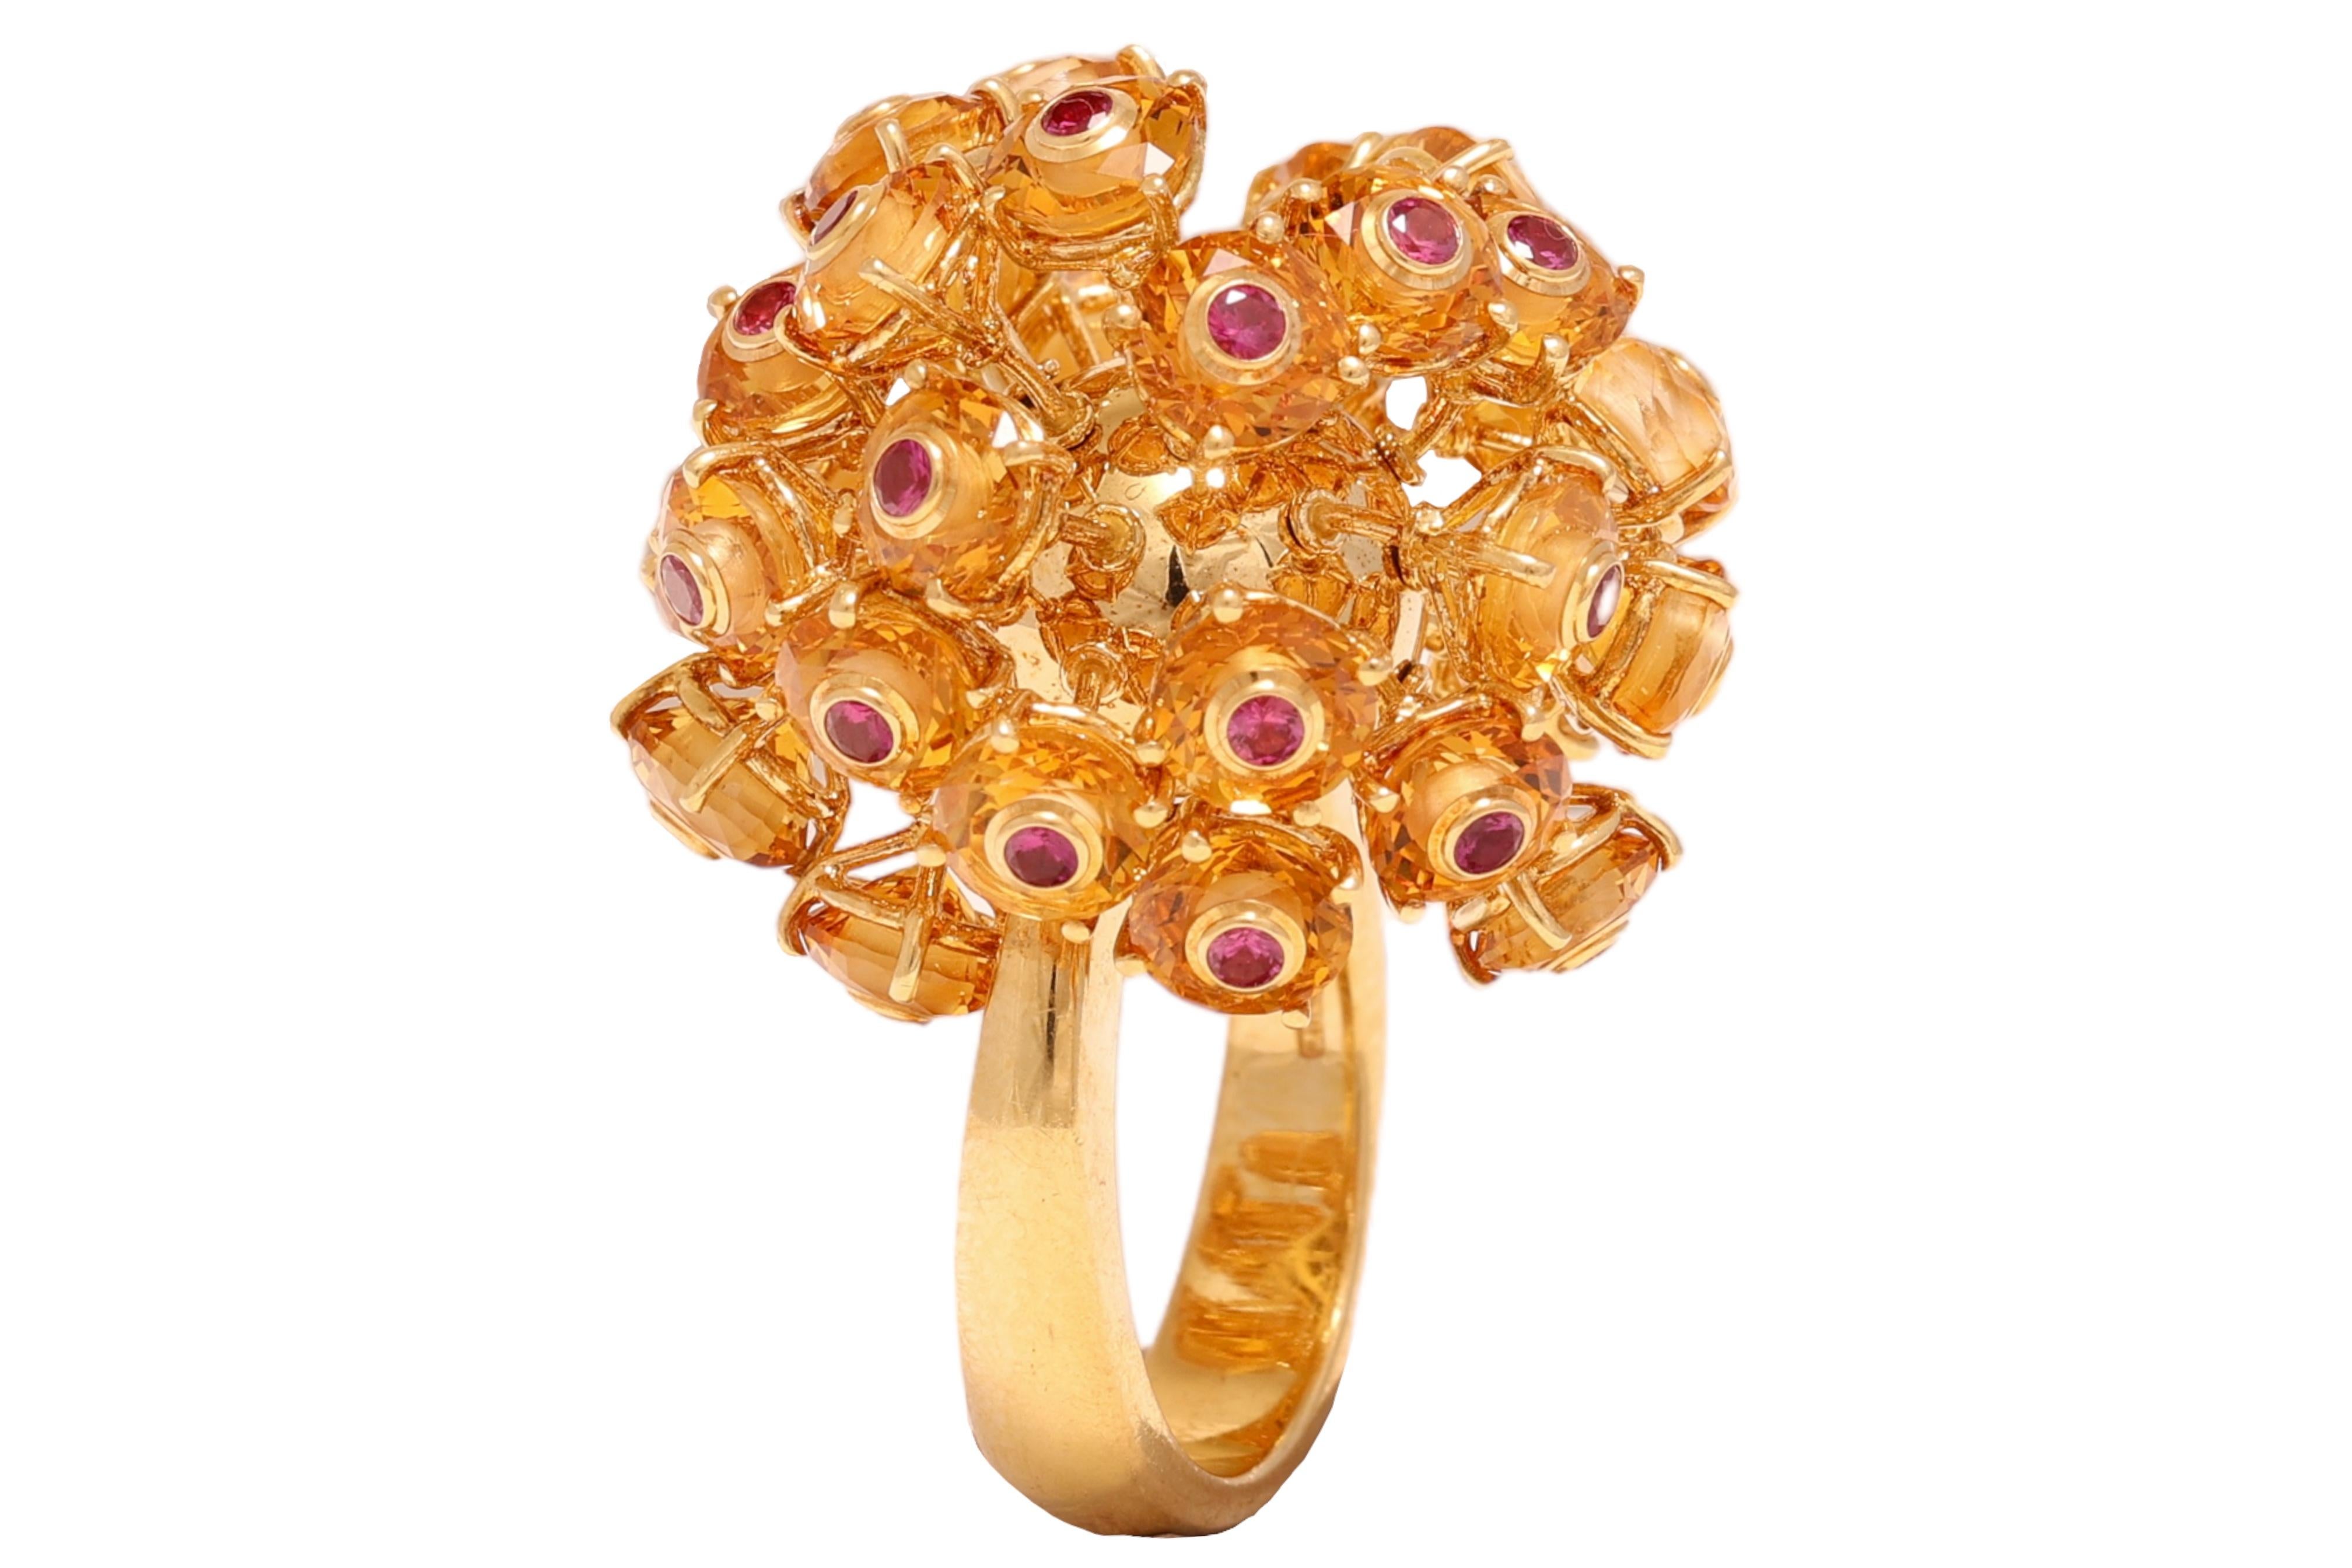  18 kt. Yellow Gold Ball of Moving 1.65 ct. Rubies and Citrine For Sale 4